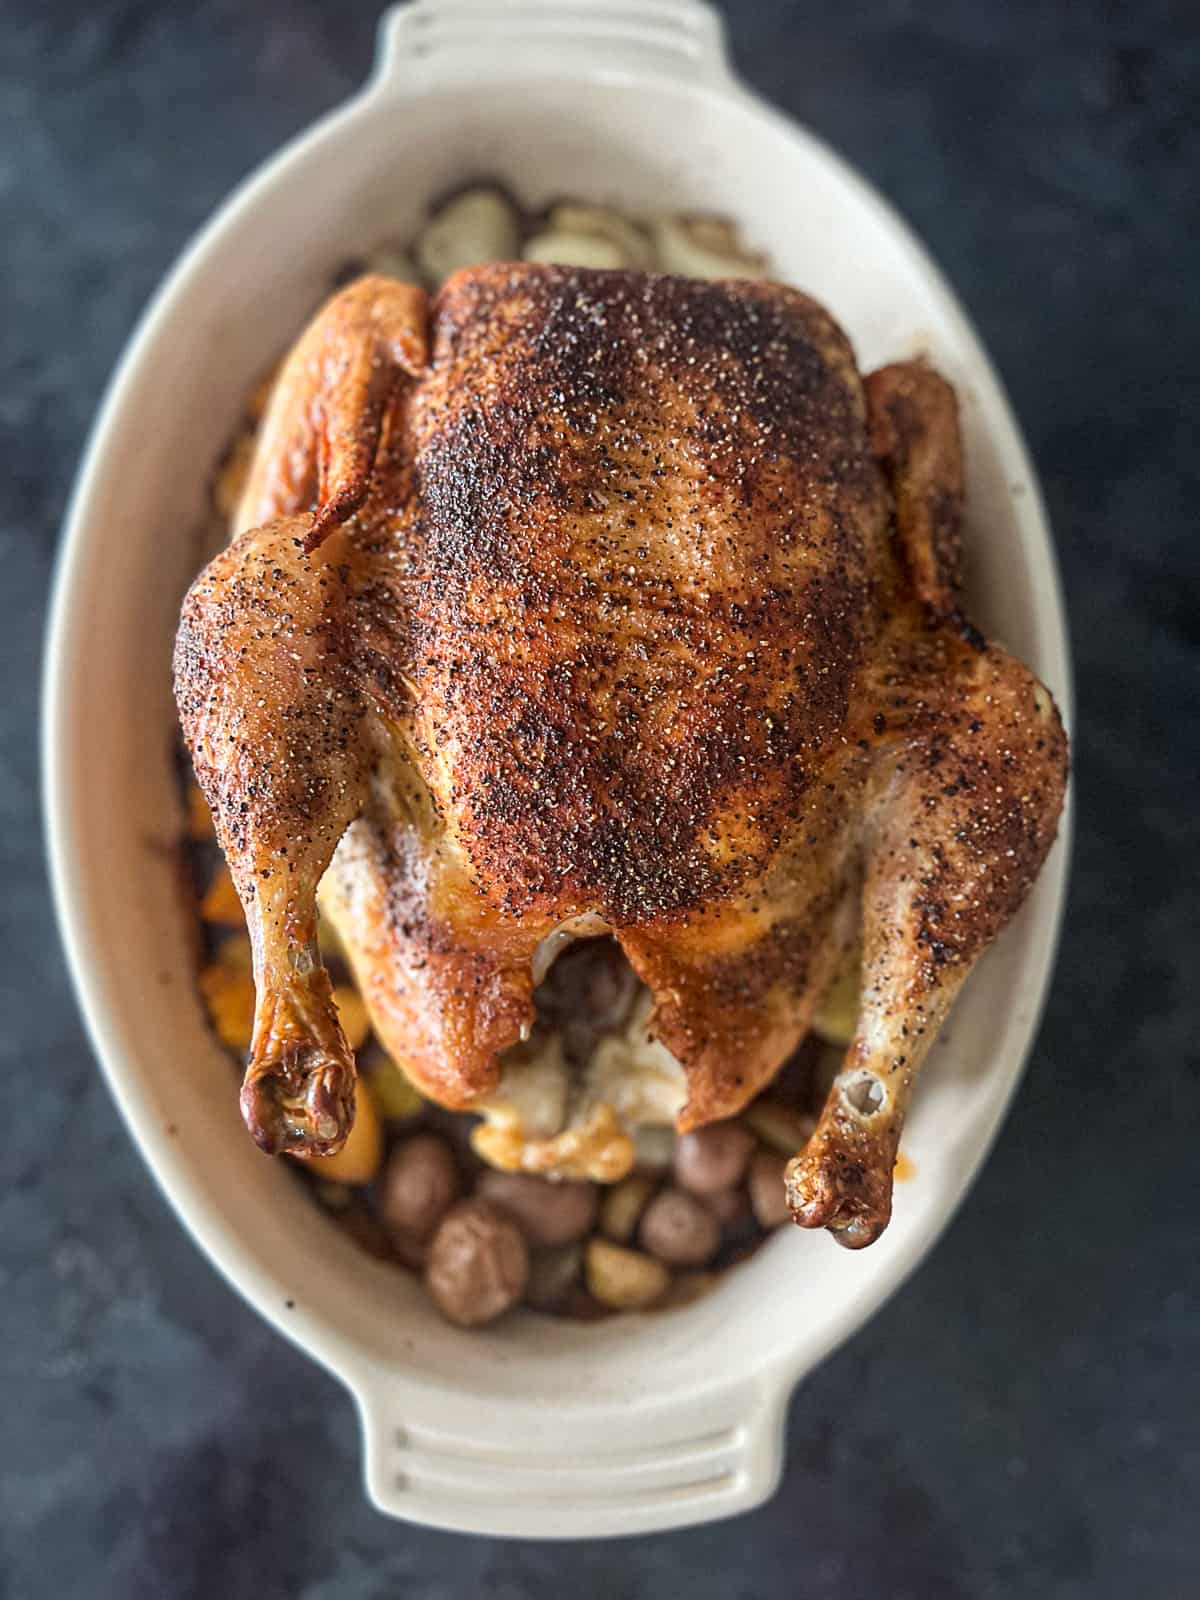 Roasted whole chicken in oven cooked at 375 degrees F